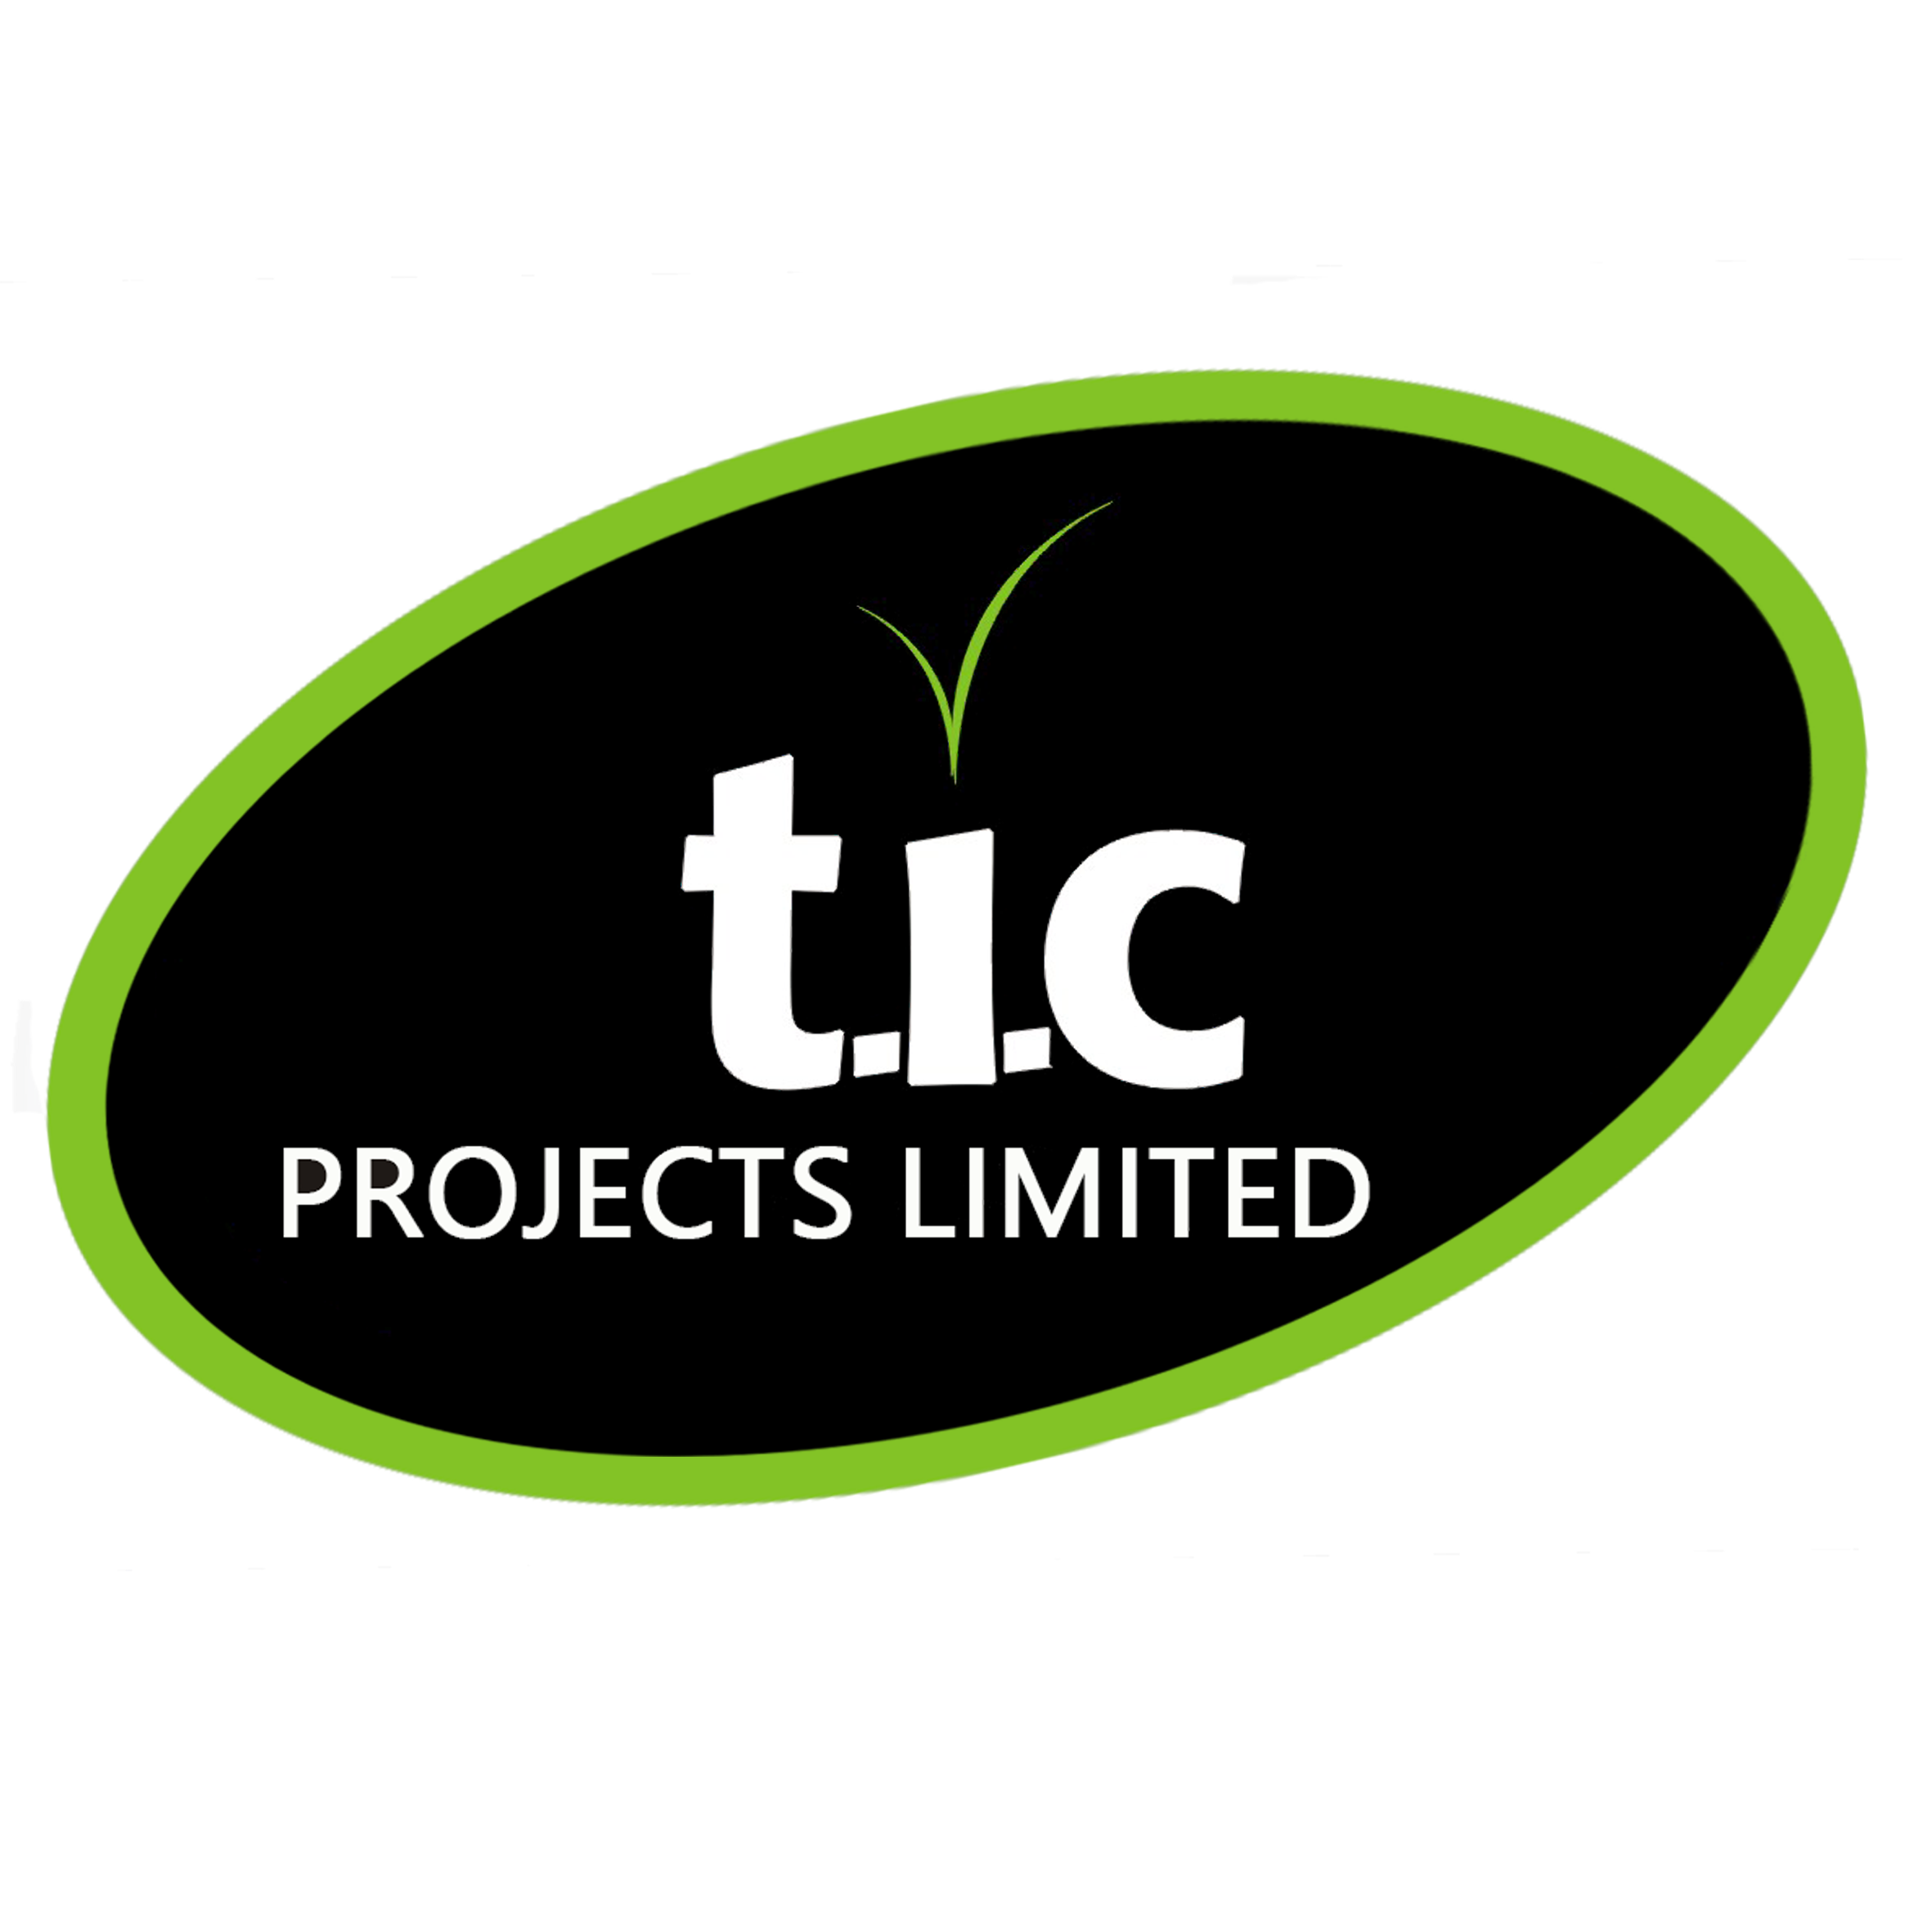 TIC Projects